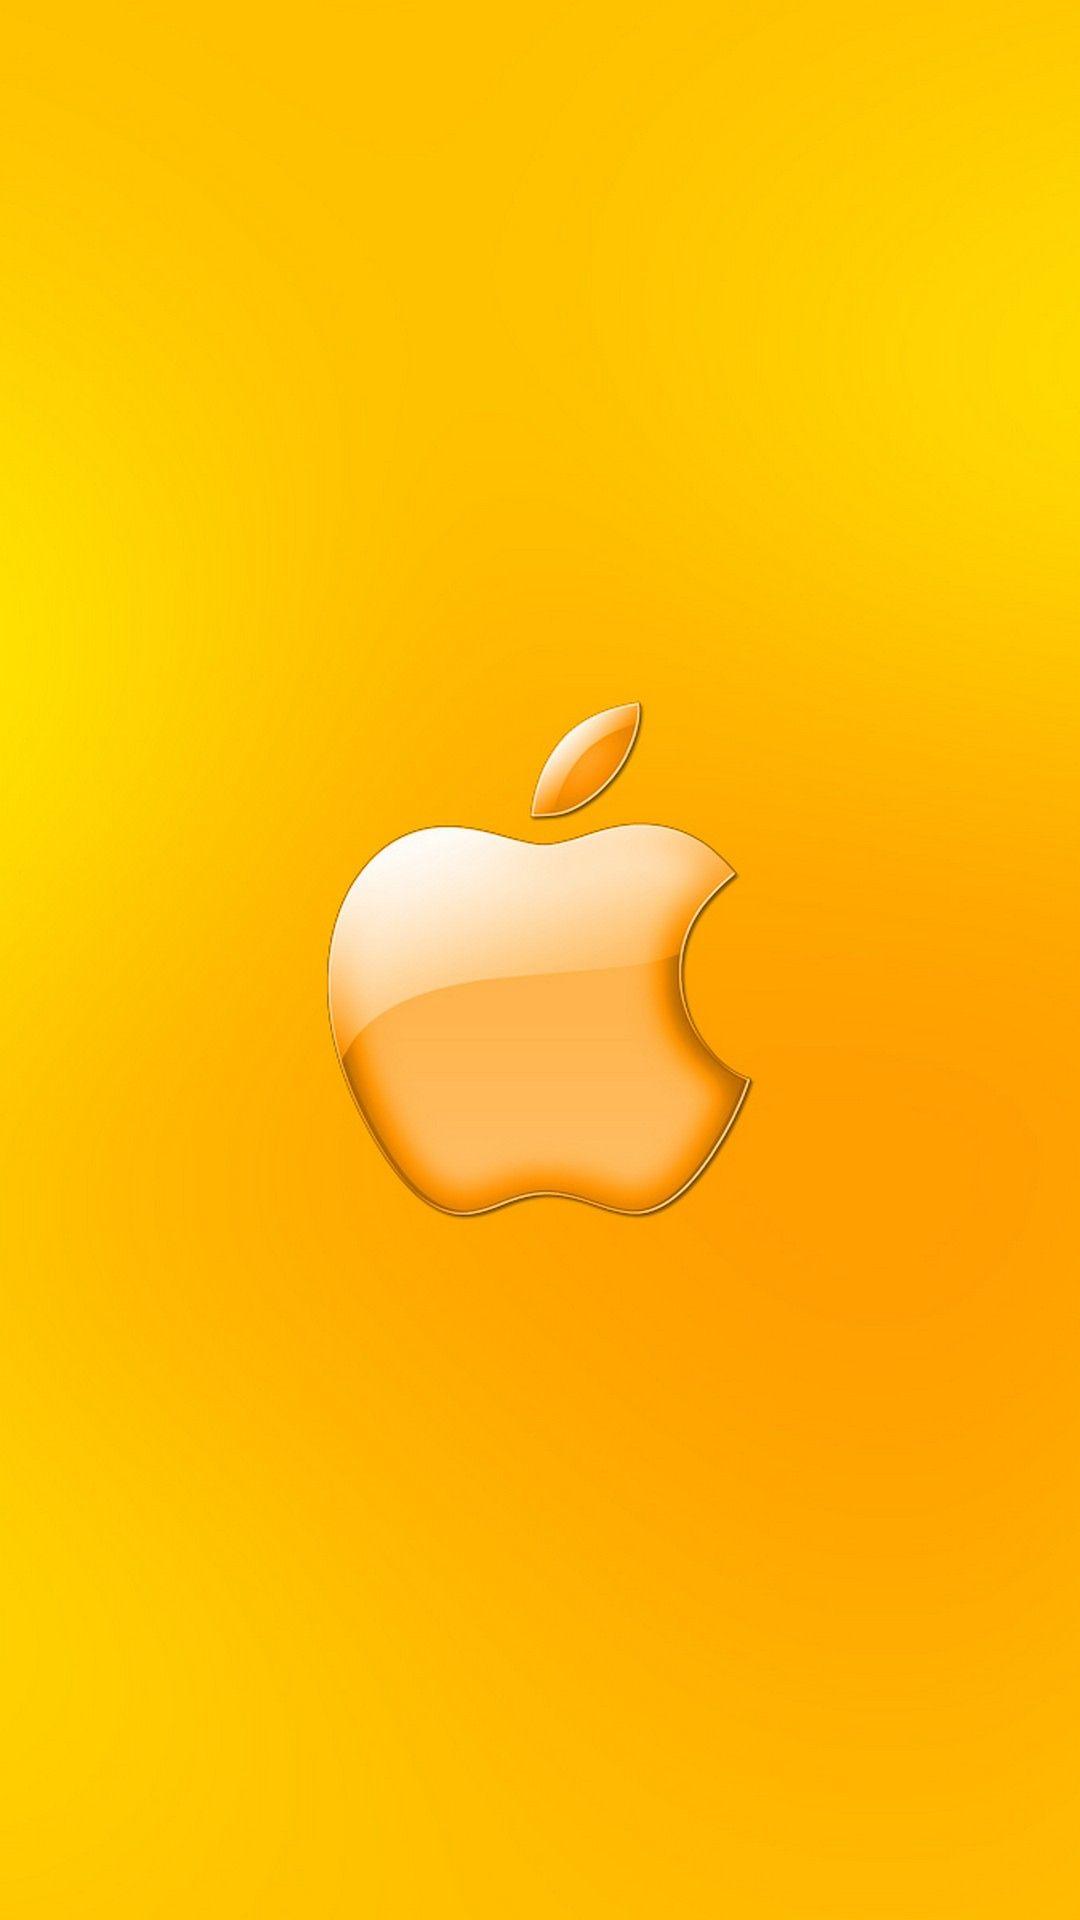 Gold Apple Logo Wallpapers Top Free Gold Apple Logo Backgrounds Wallpaperaccess